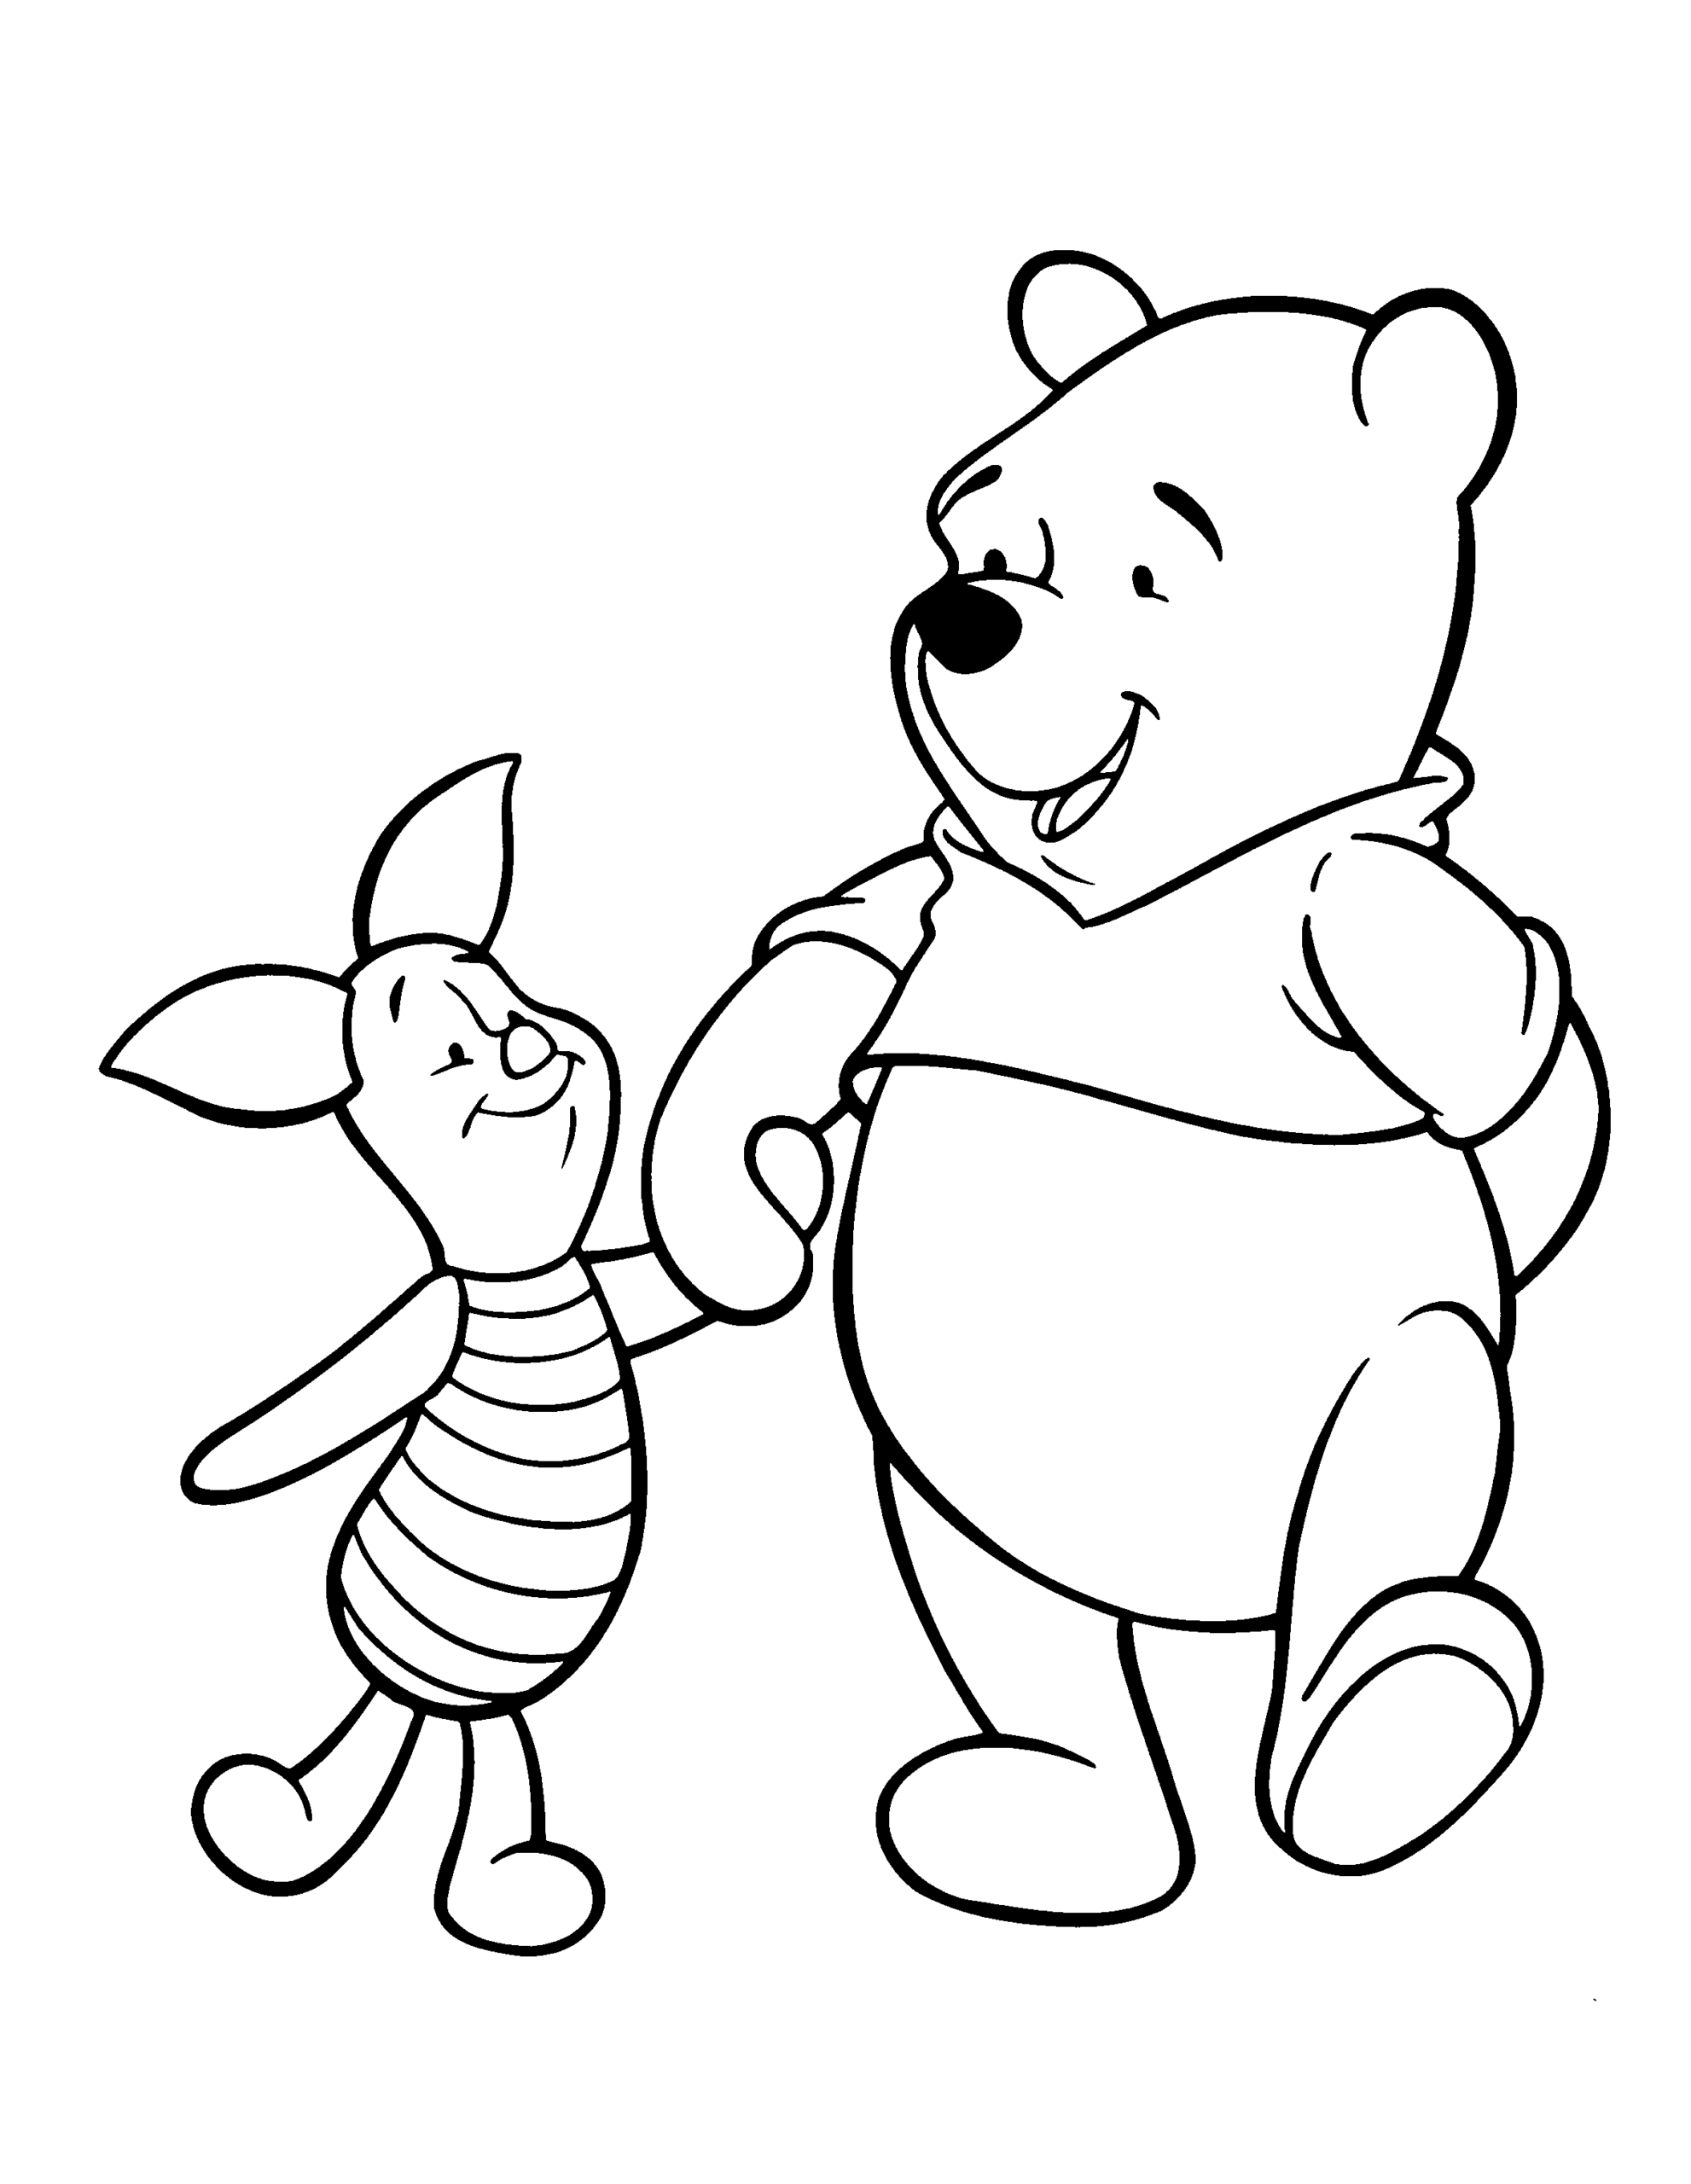 Winnie the Pooh Coloring Pages Cartoons winnie the pooh 106 Printable 2020 7085 Coloring4free